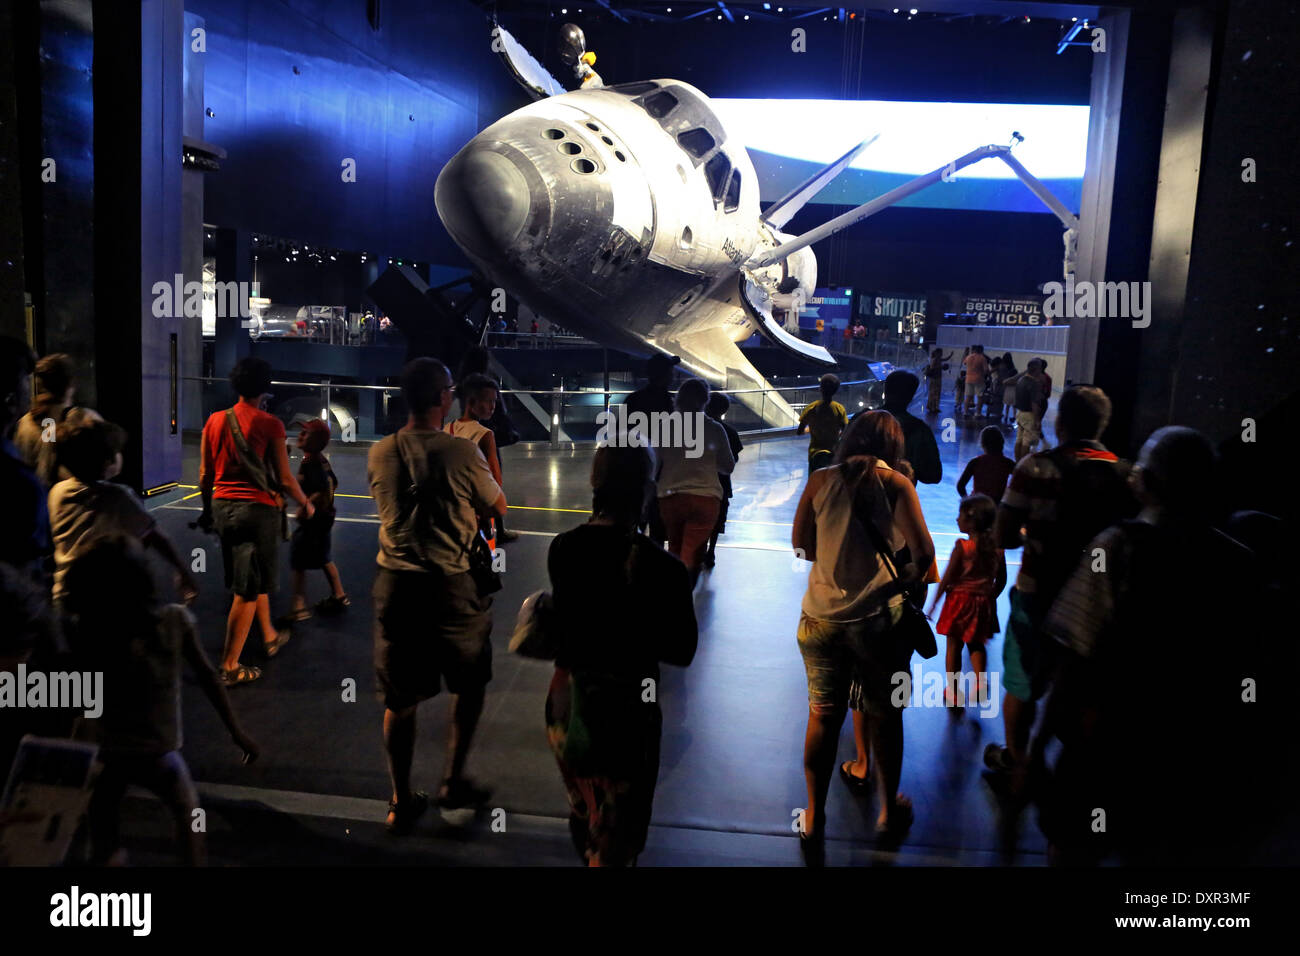 Merritt Iceland, United States of America, the space shuttle Atlantis at the Kennedy Space Center Visitor Complex Stock Photo